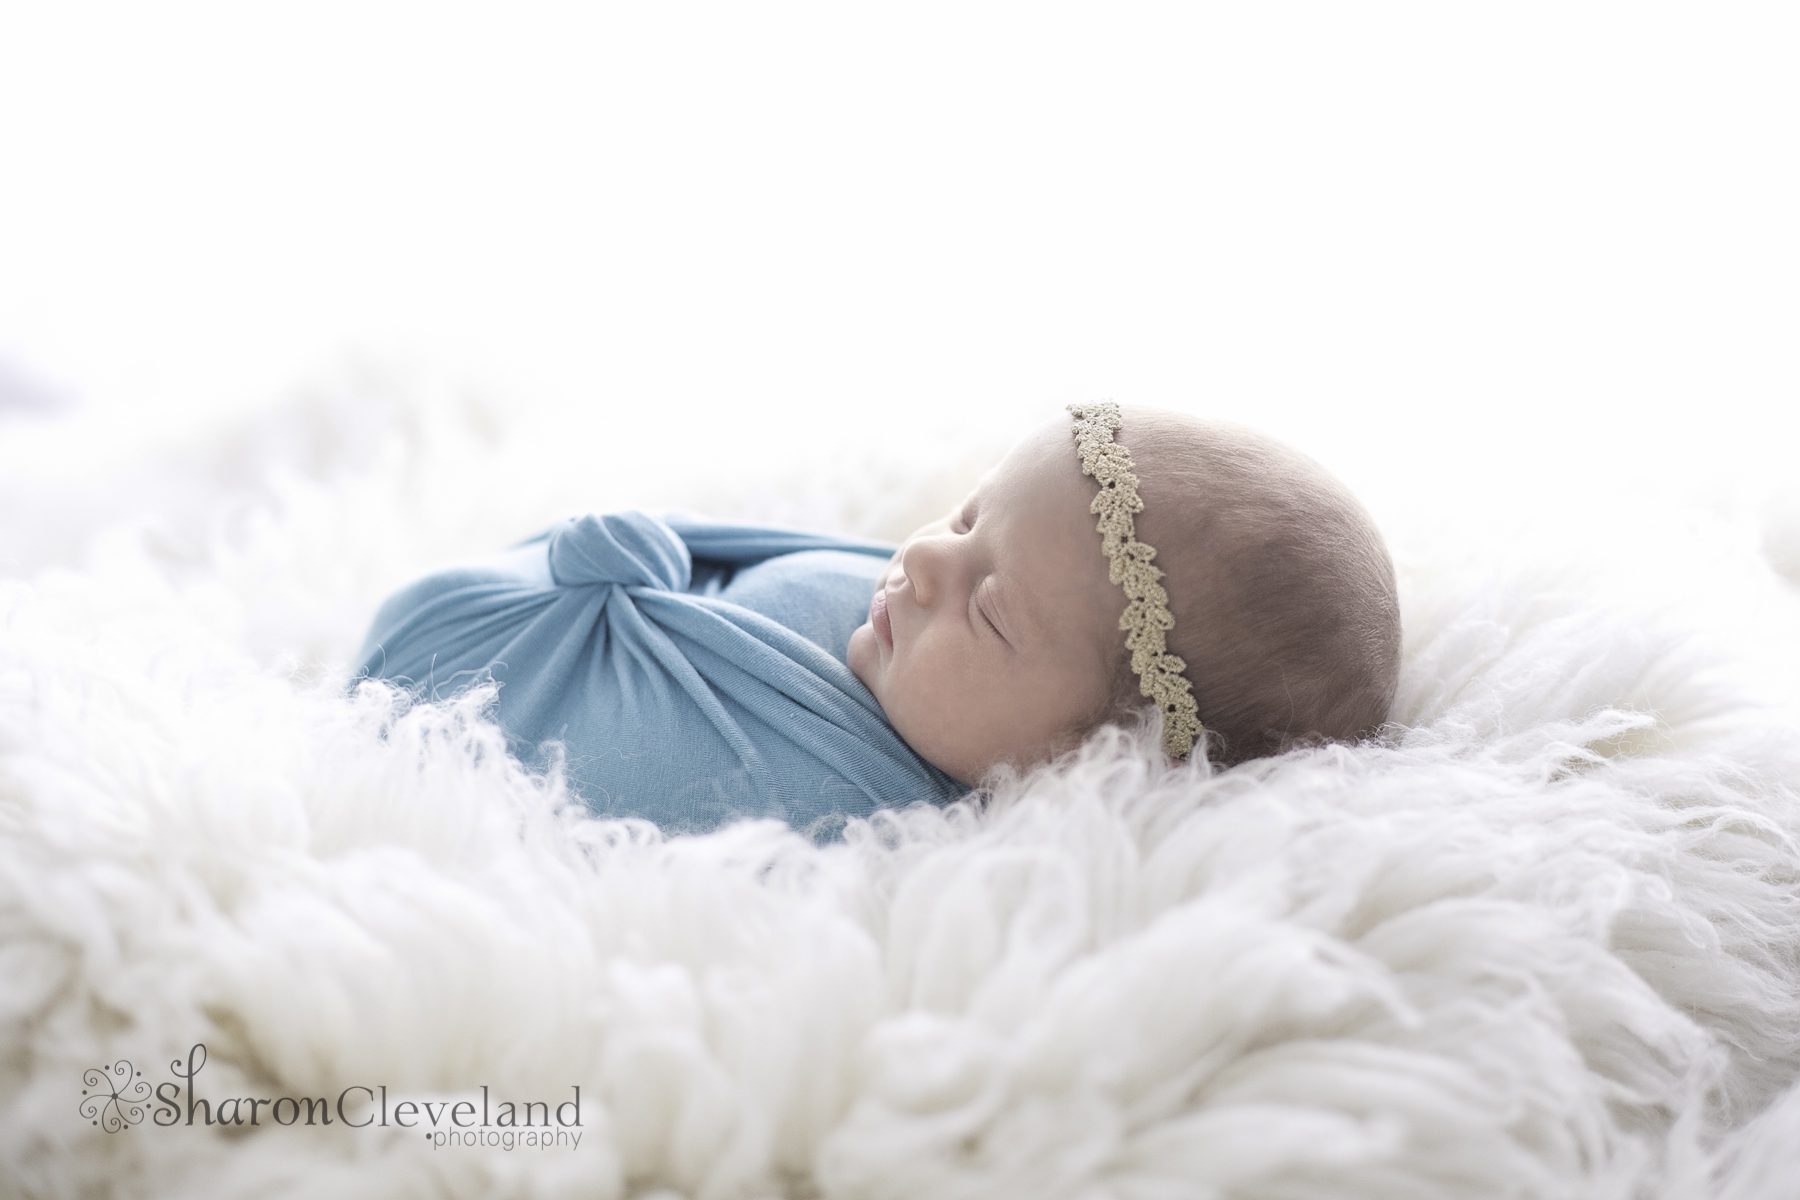 How to book a newborn session